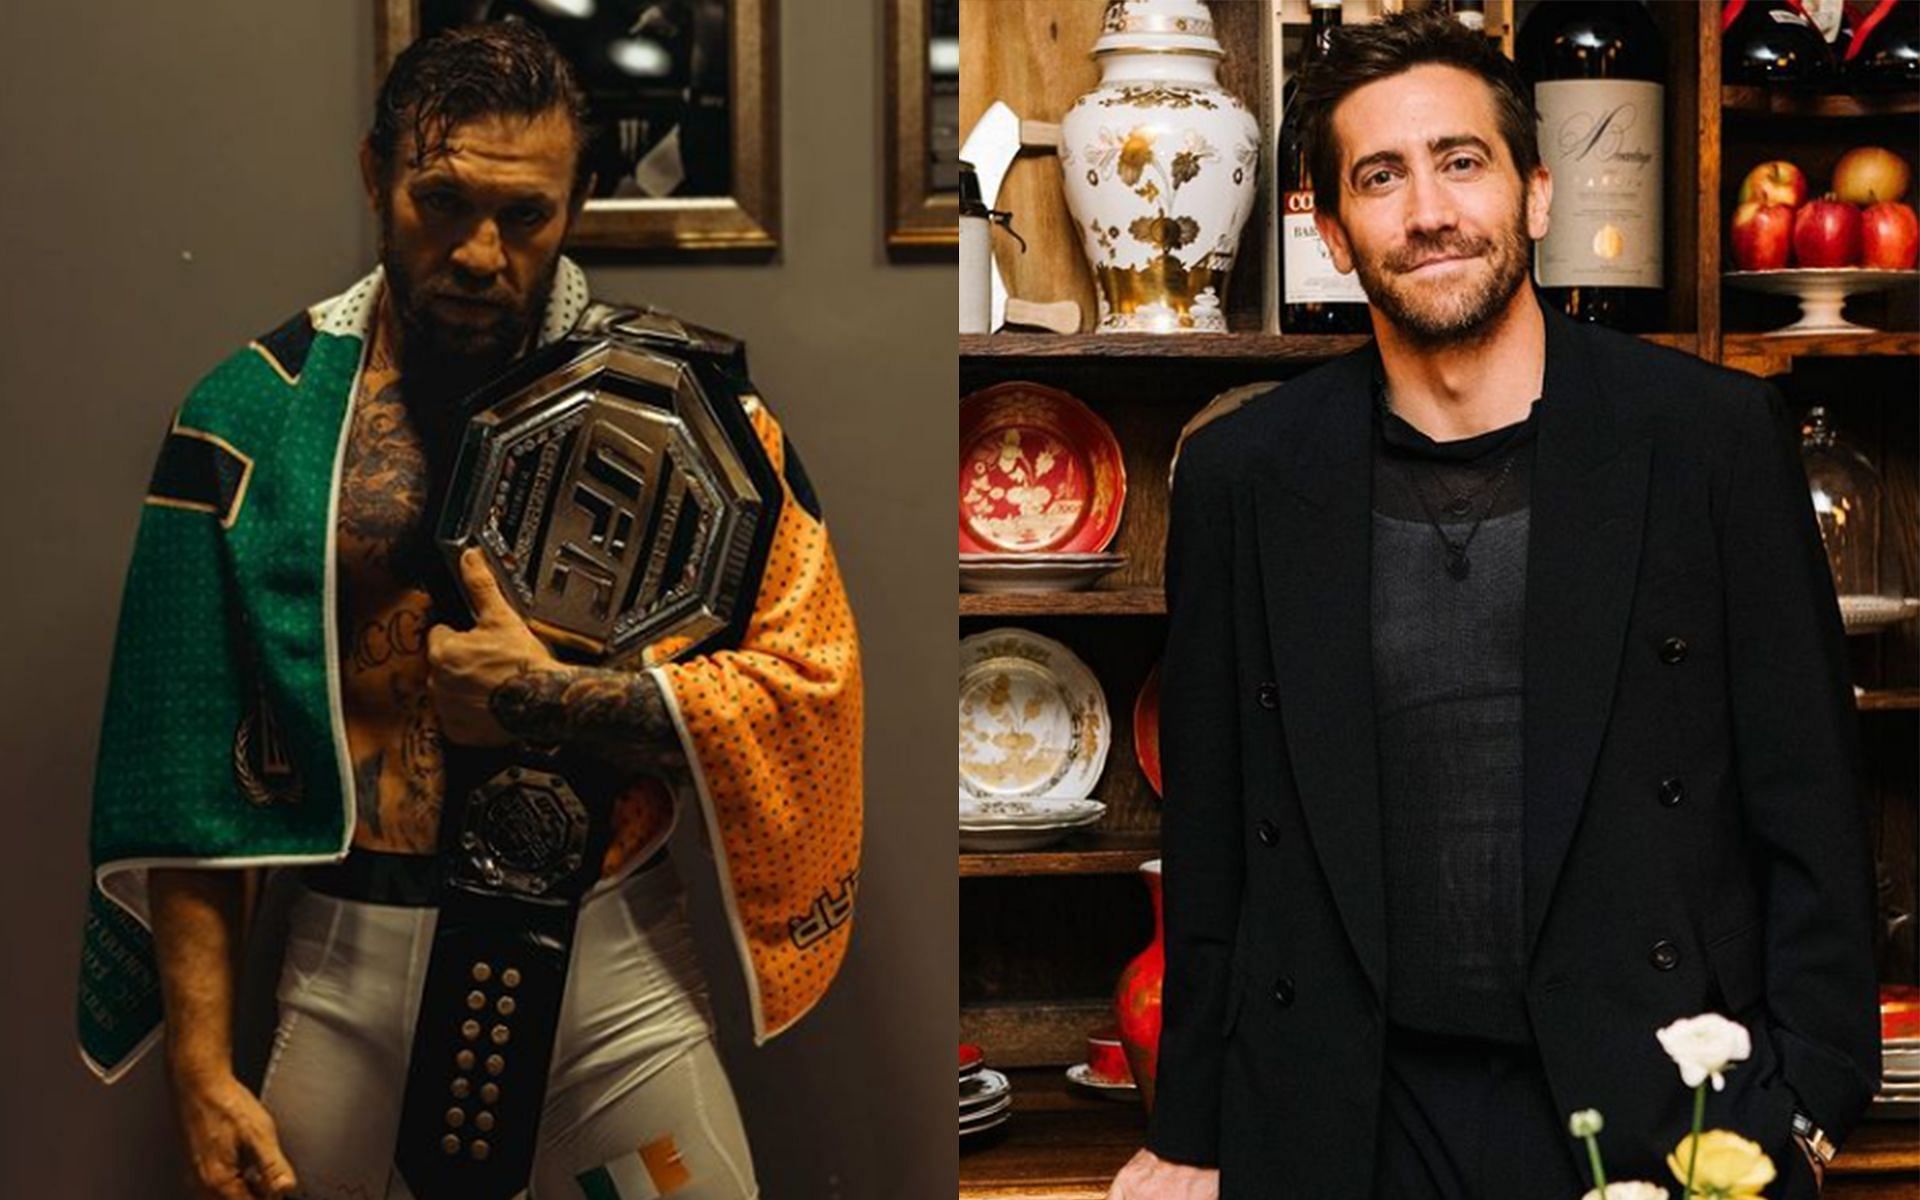 Conor McGregor (left) and Jake Gyllenhaal (right) starrer Road House is set to release in early 2024 (Images Courtesy: @thenotoriousmma and @jakegyllenhaal Instagram)